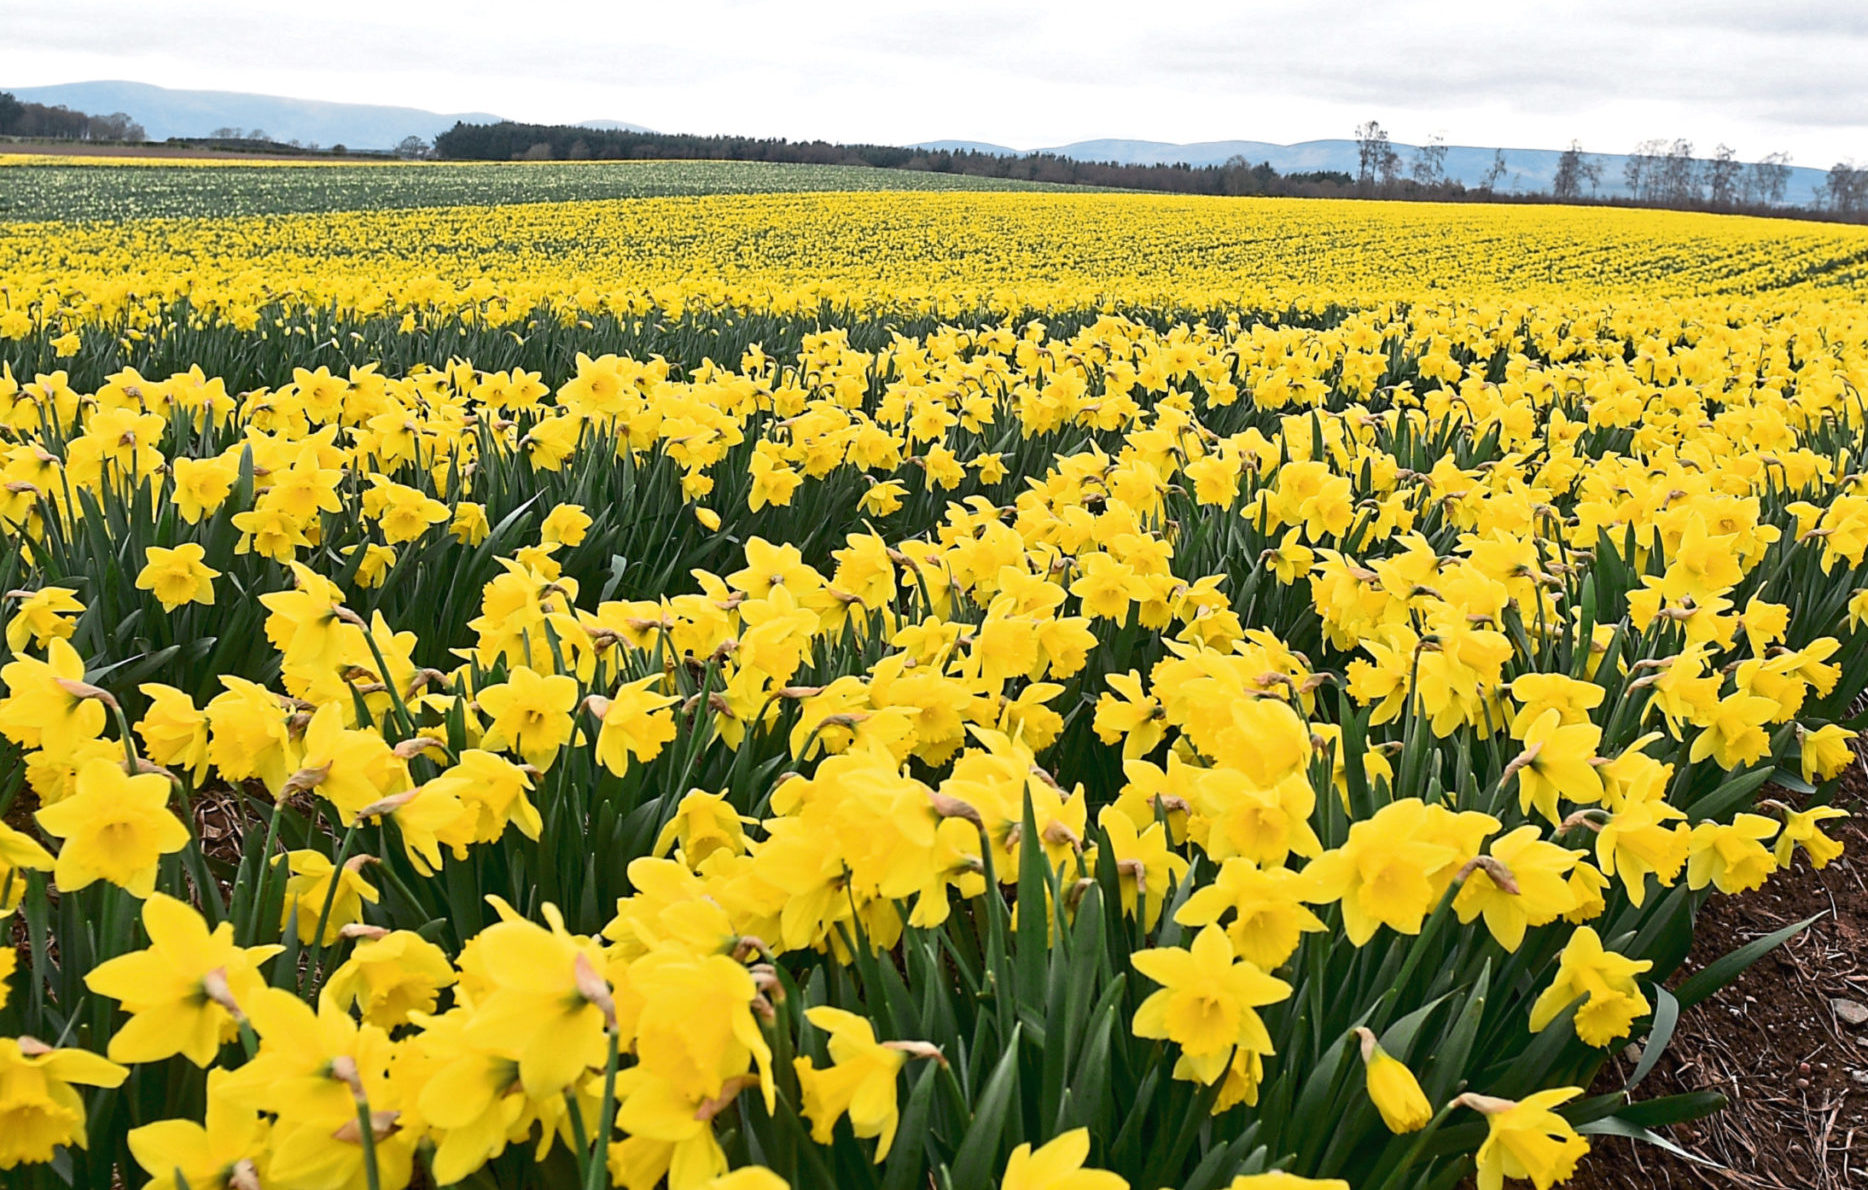 Grampian Growers has lost around a million bunches of daffodils since picking halted last week.